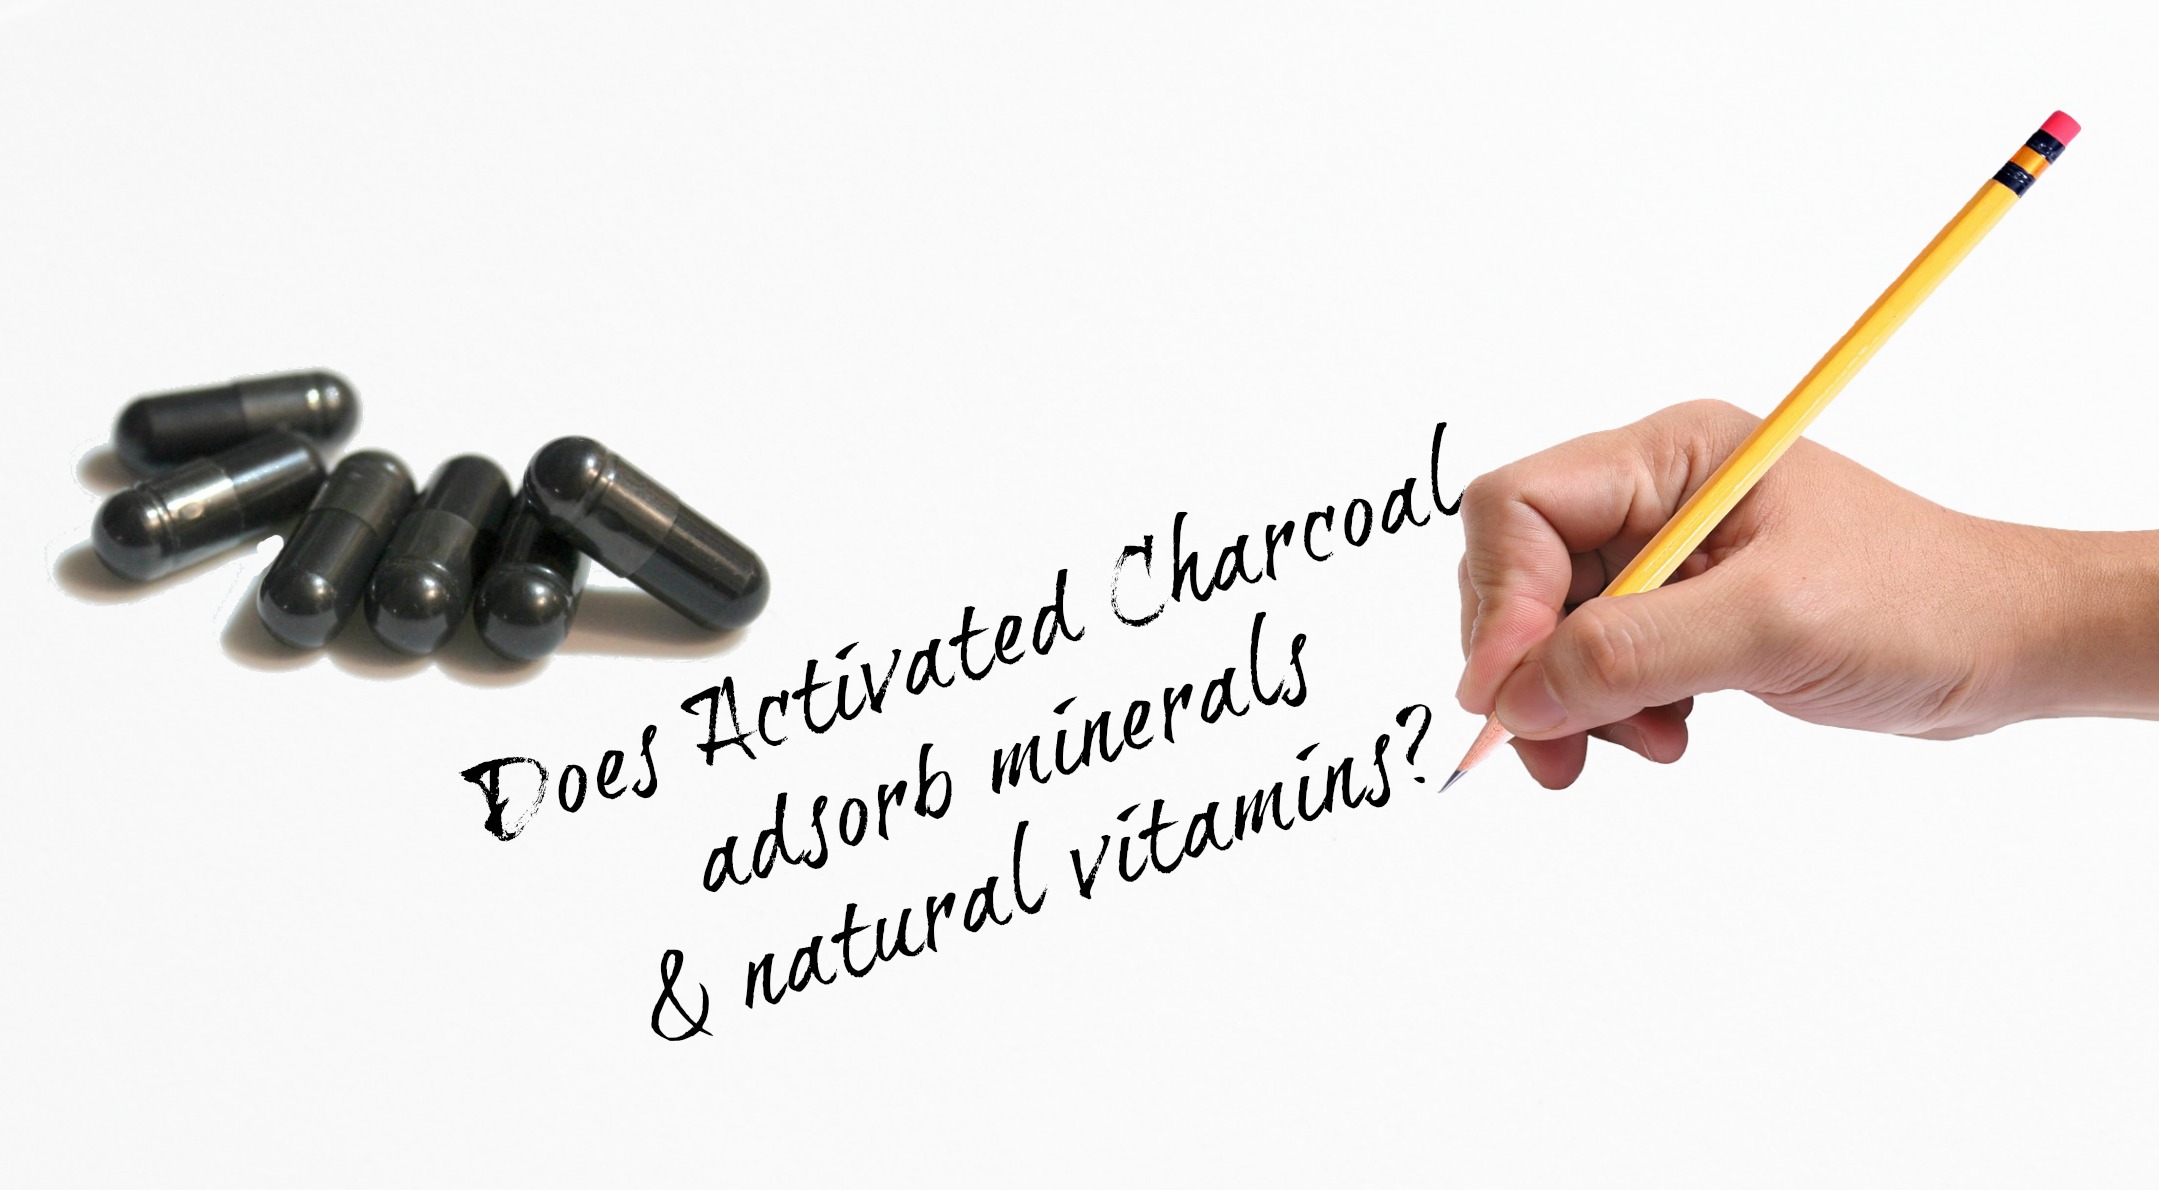 header Does activated charcoal adsorb minerals and natural vitamins - Does Activated Charcoal Adsorb Minerals & Vitamins?